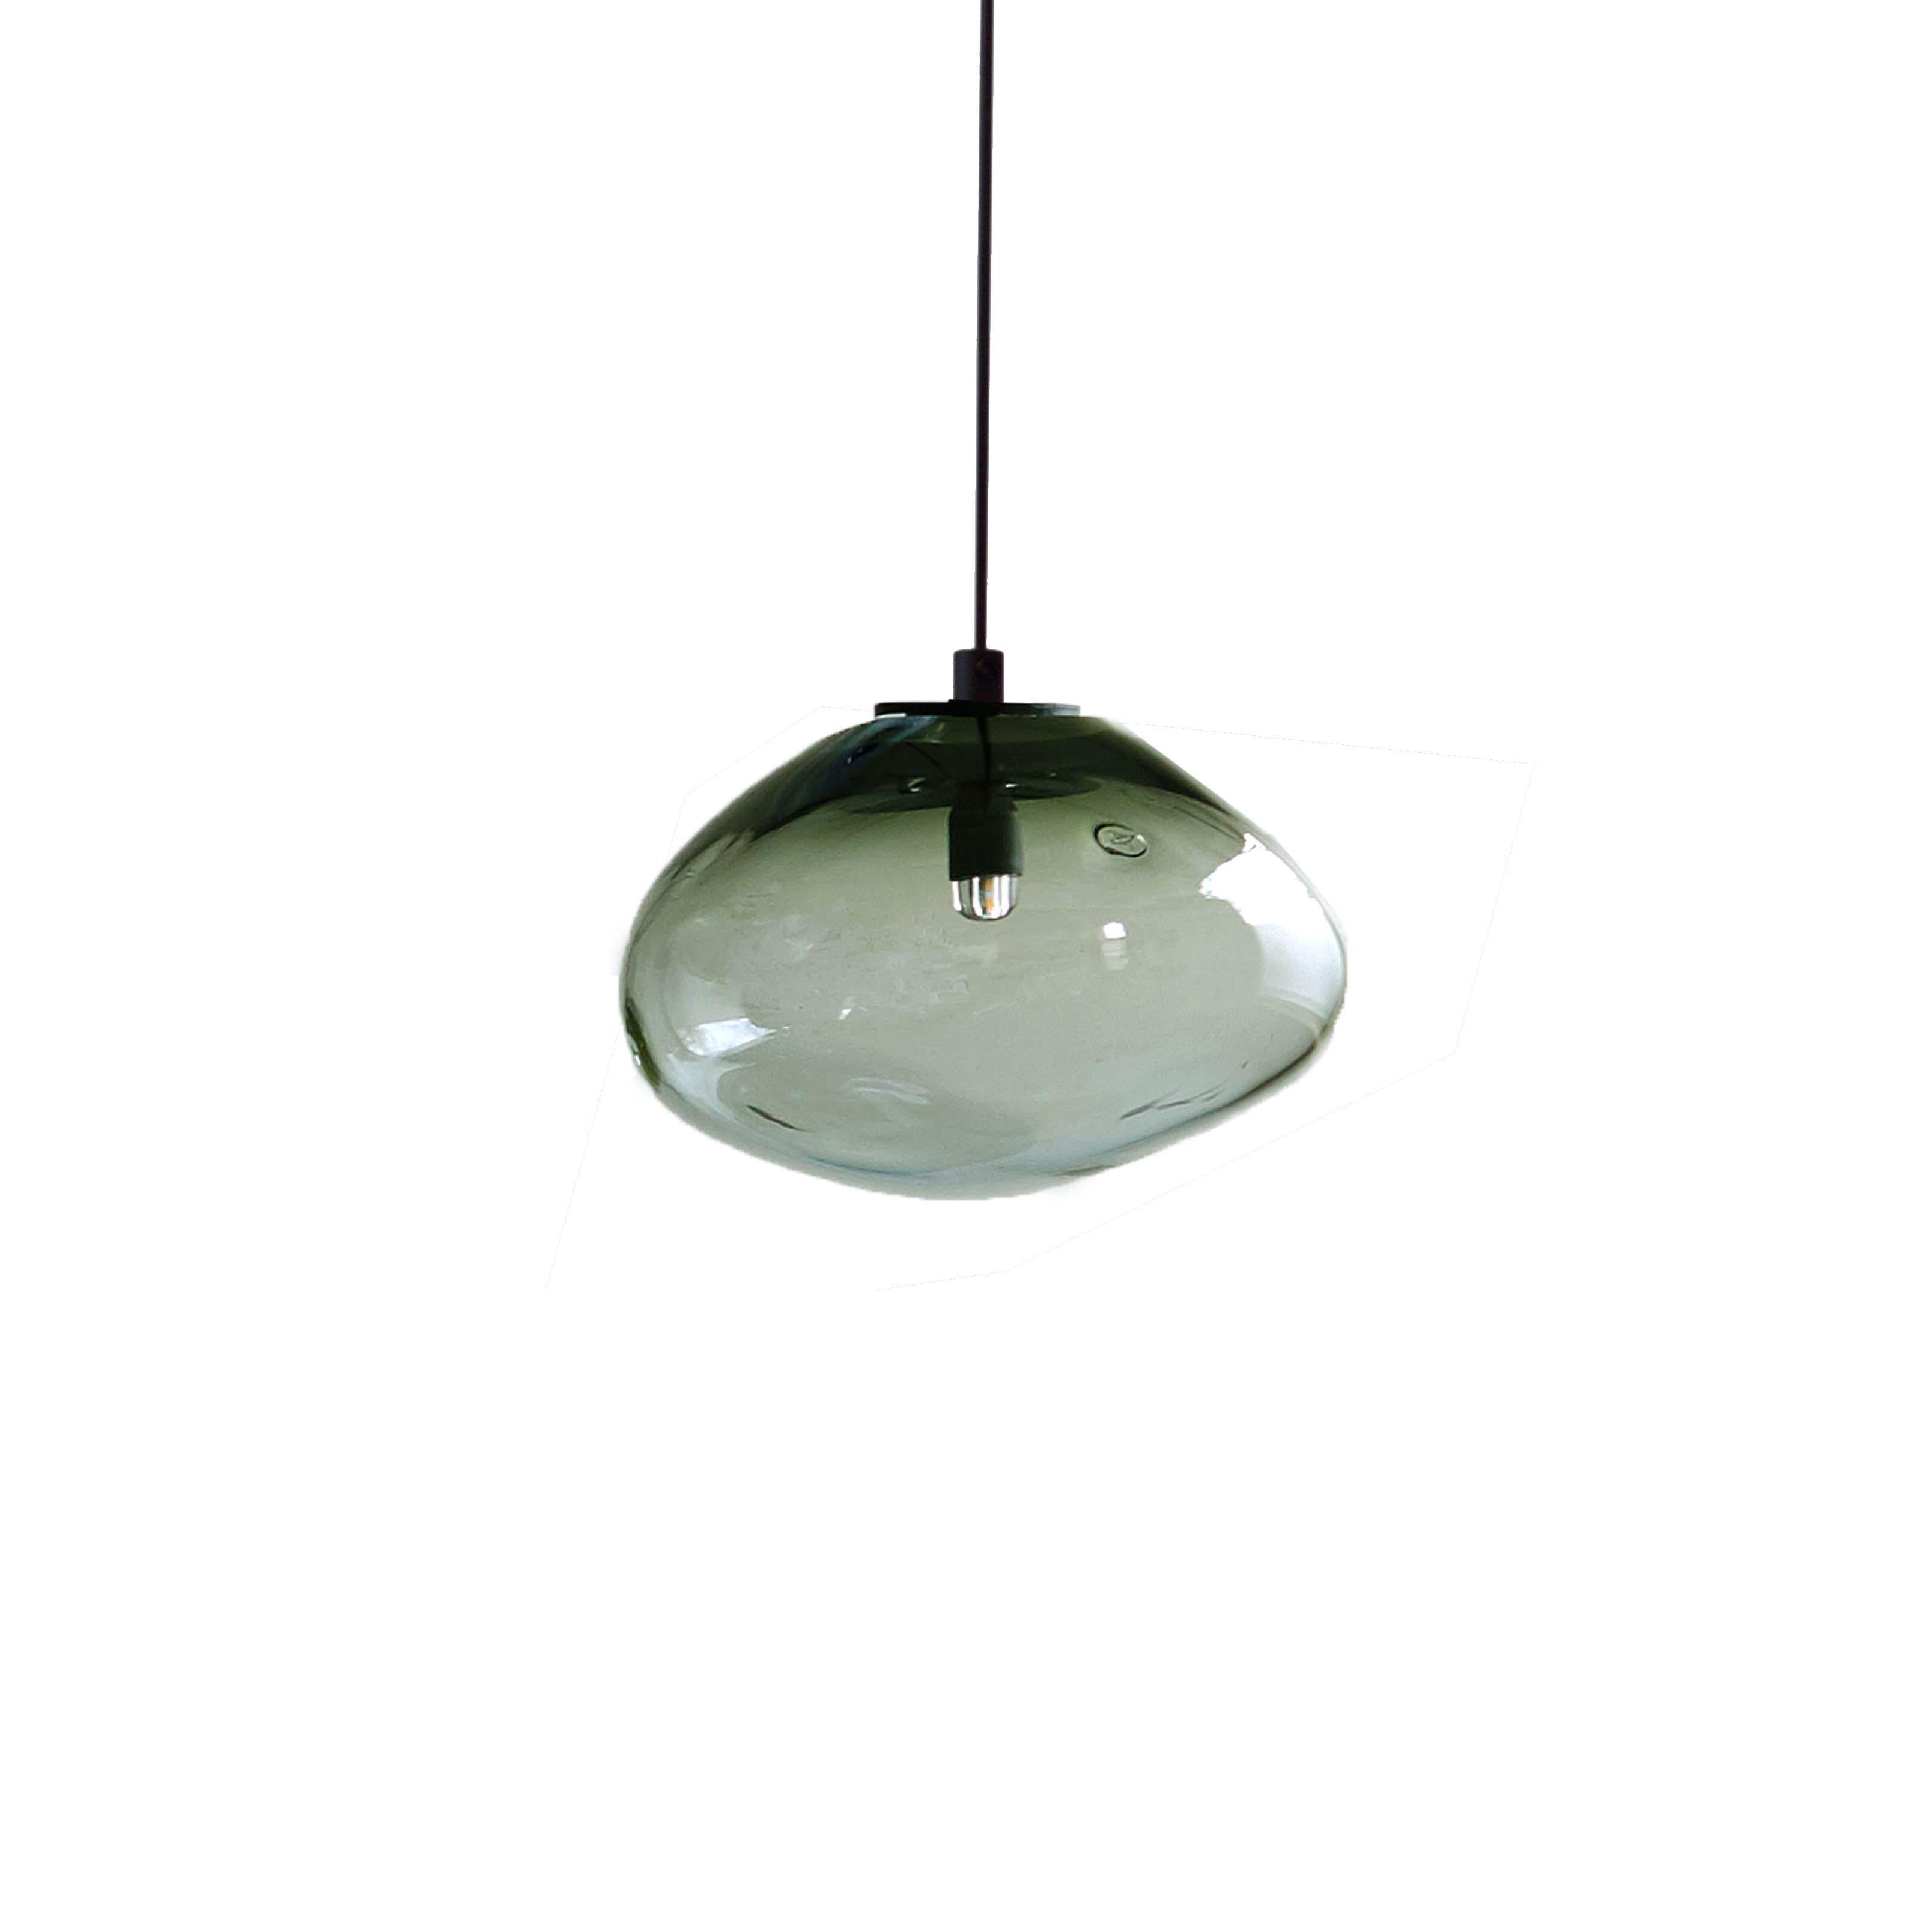 Starglow turmalin pendant by Eloa
No UL listed 
Material: glass, steel, silver
Dimensions: D15 x W13 x H100 cm
Also available in different colours and dimensions.

All our lamps can be wired according to each country. If sold to the USA it will be